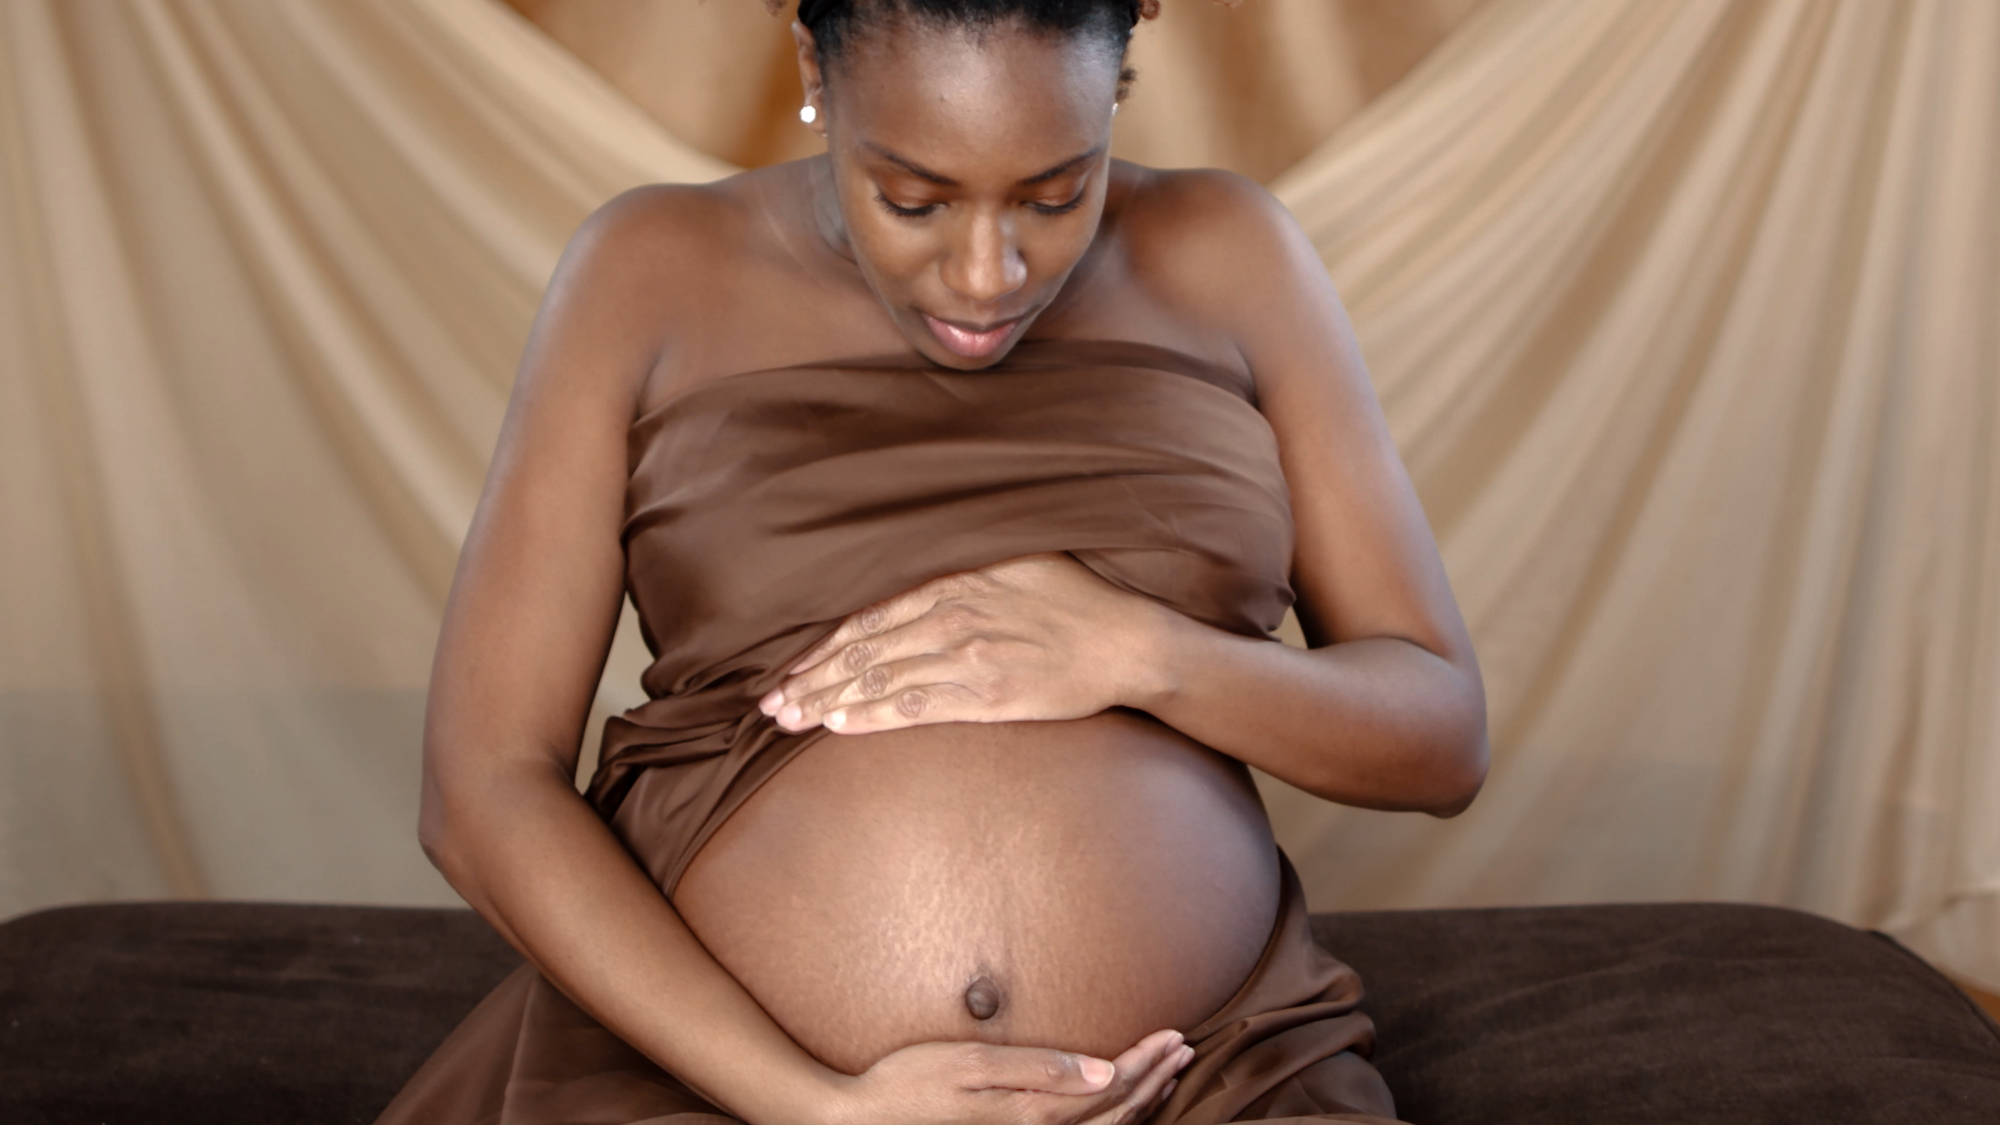 A Black, pregnant woman wrapped in brown sheets holds her bare stomach